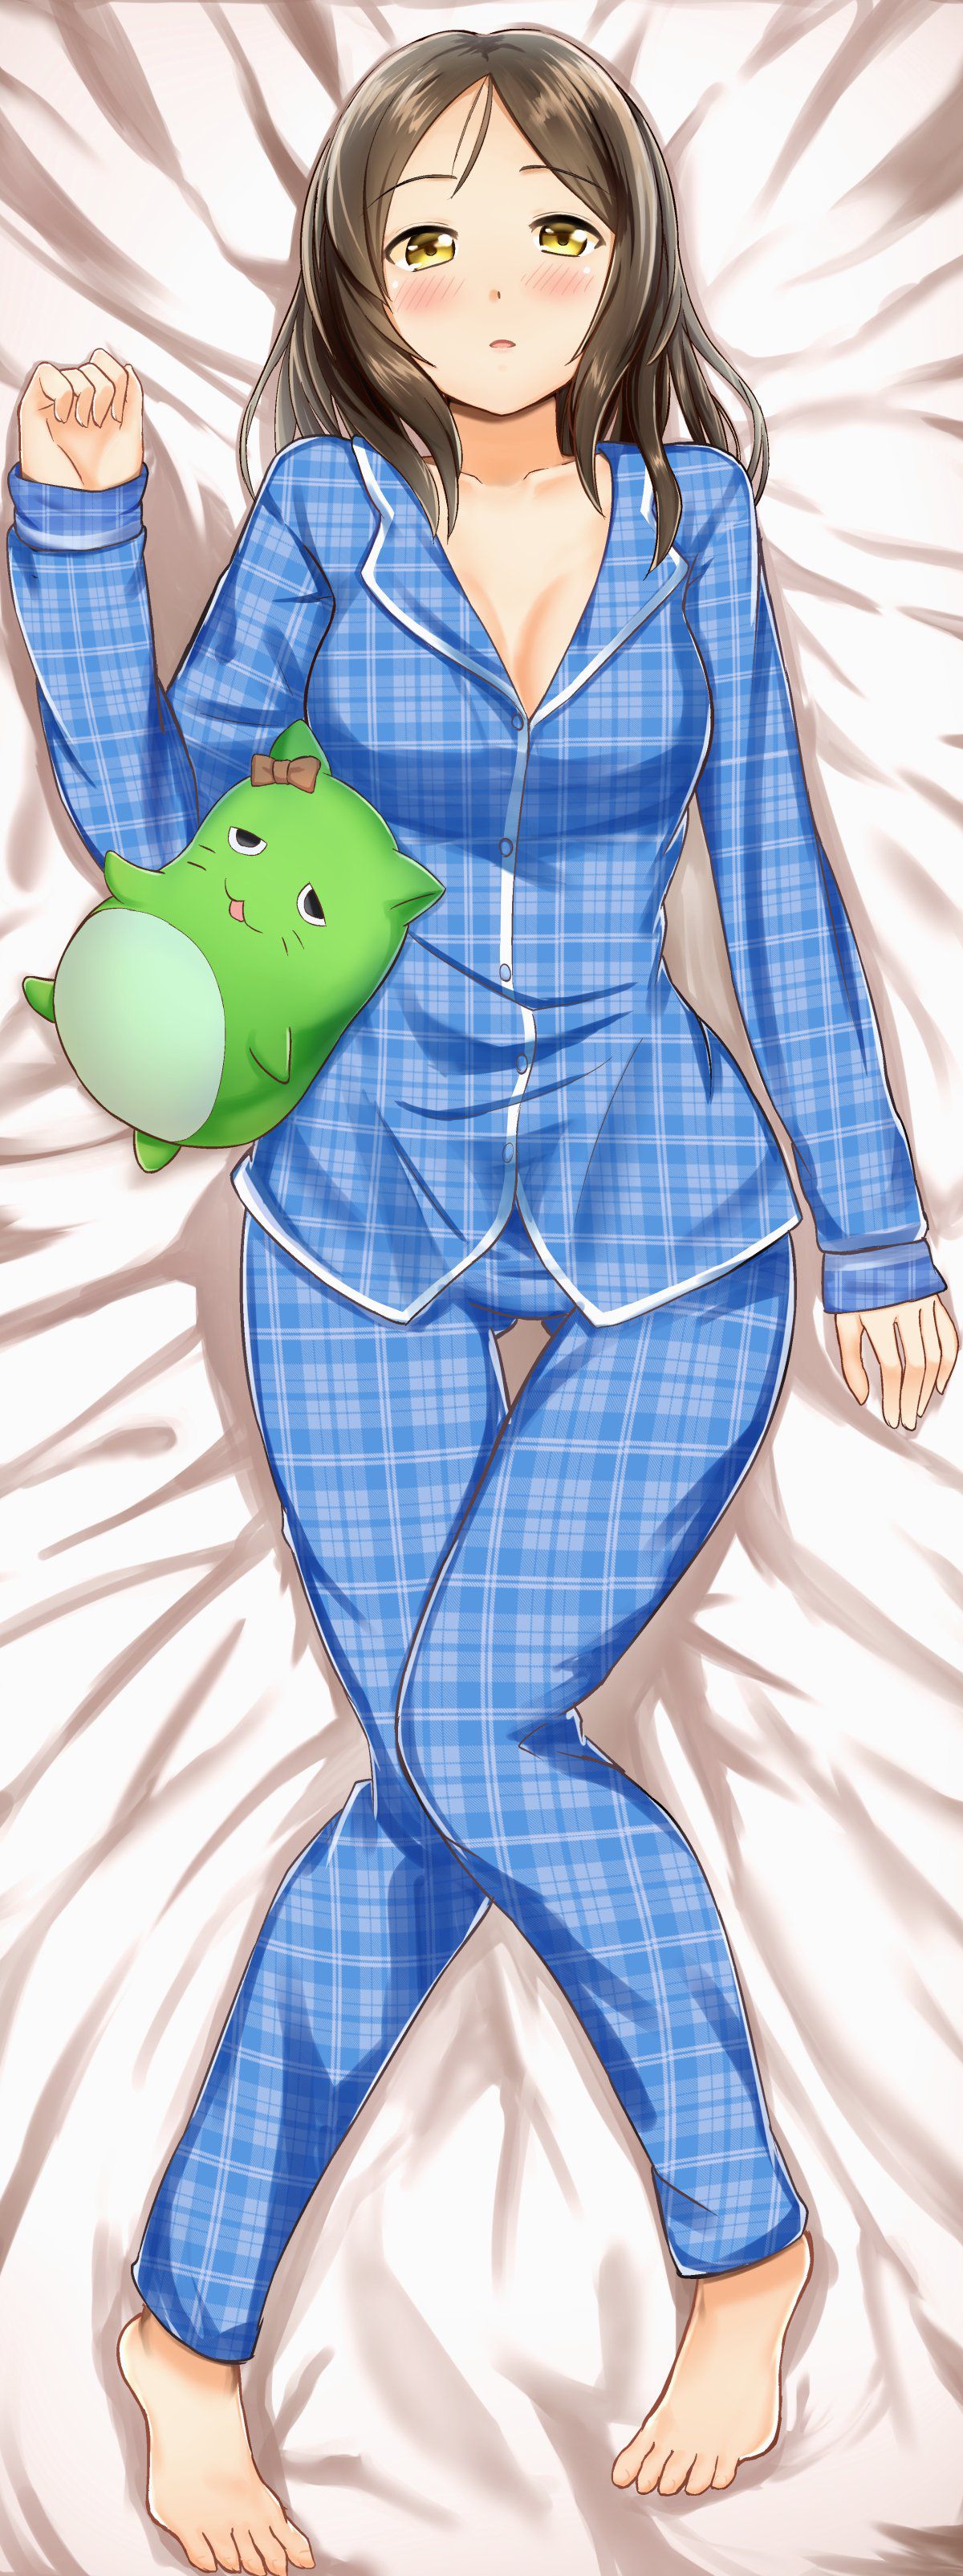 [the second] Beautiful girl second image [non-eroticism] dressed in pajamas wanting you to share a bed 32